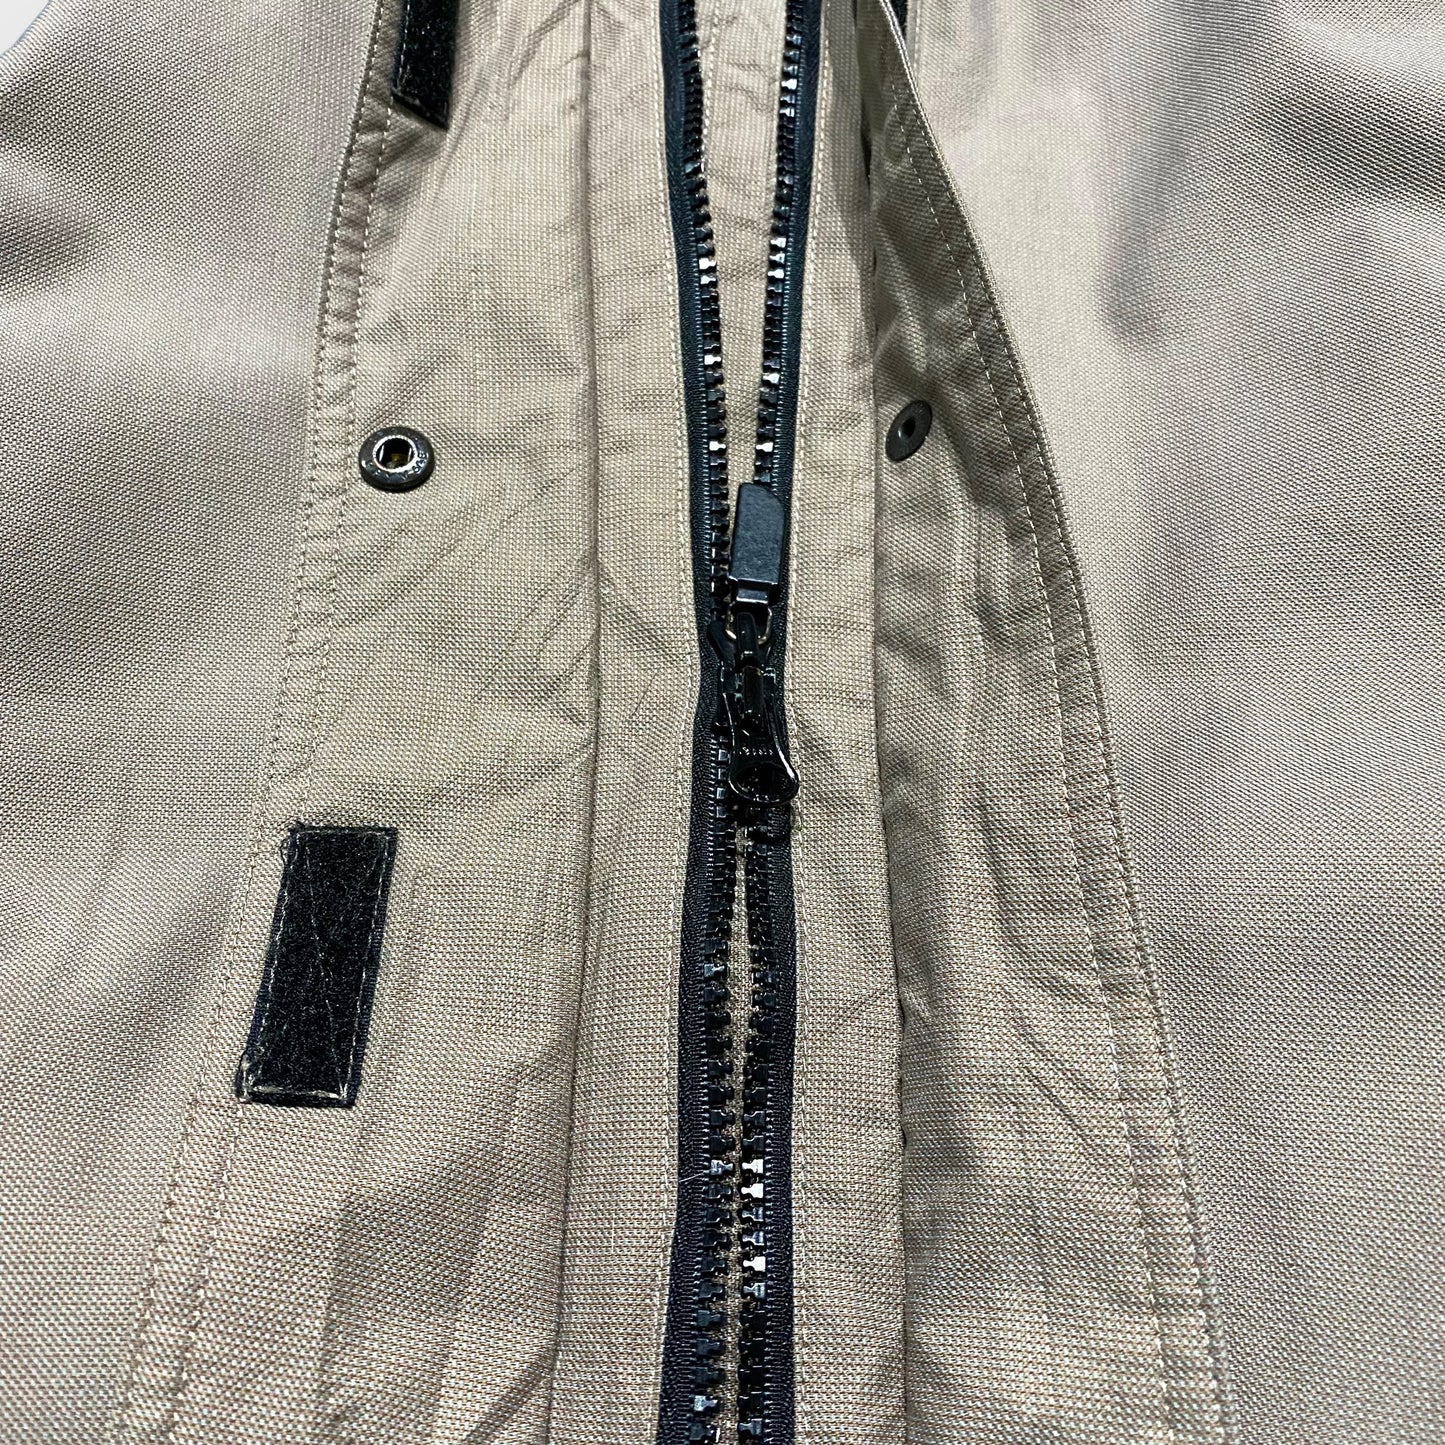 90's "THE NORTH FACE" Sawtooth jacket